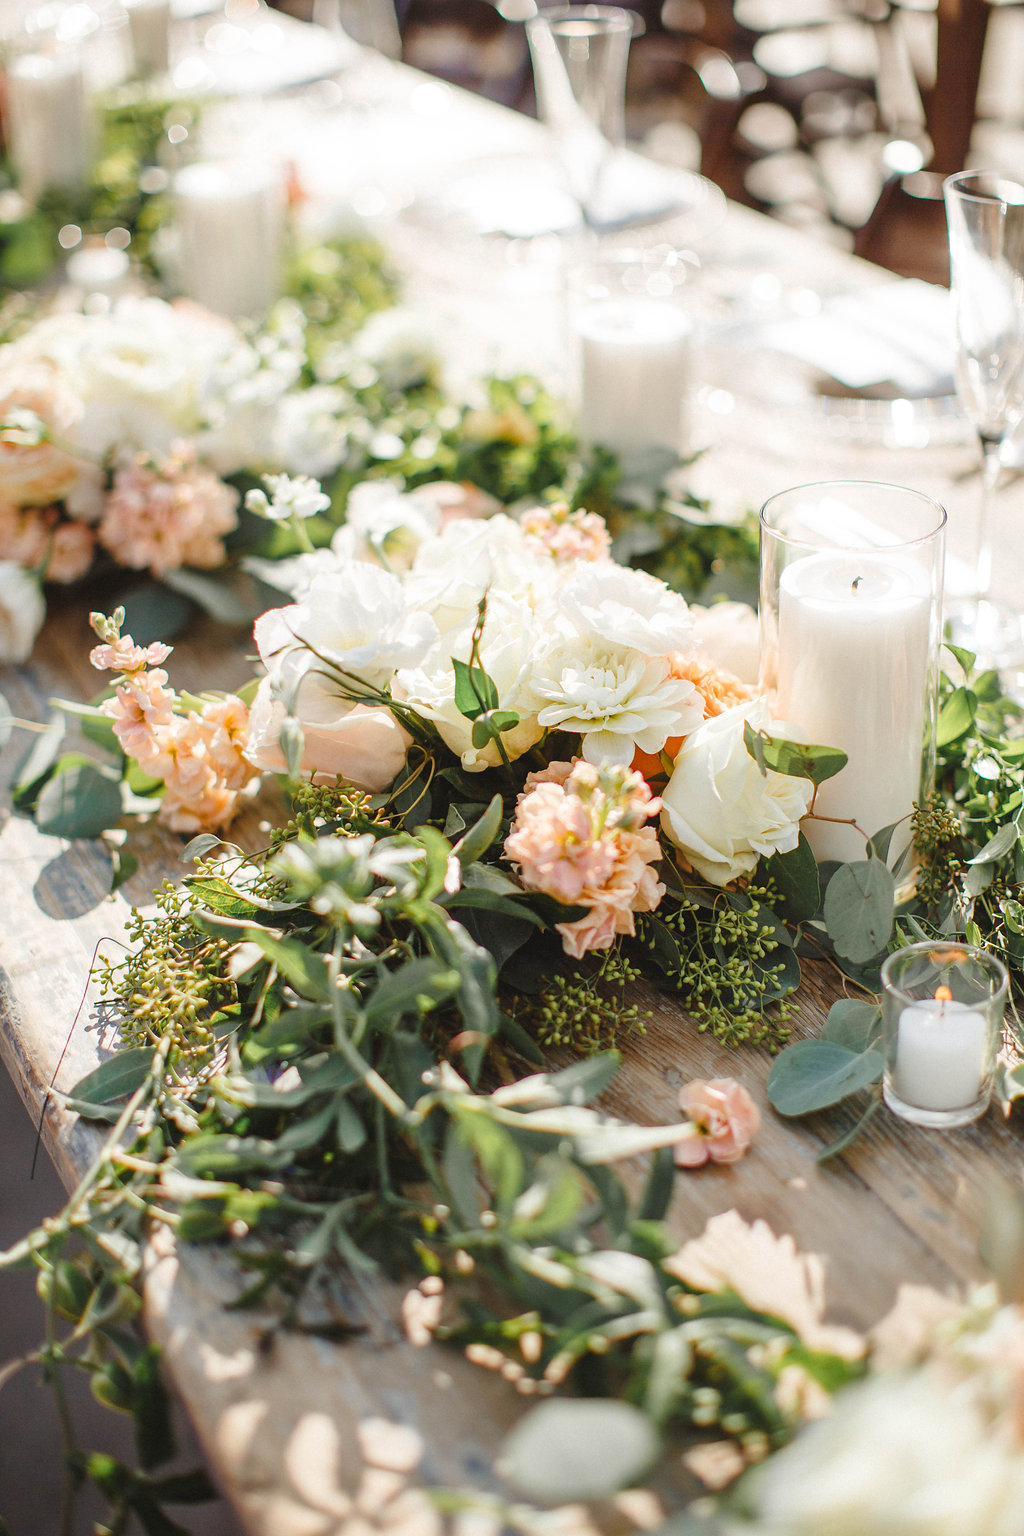 Florals By Jenny: Soft Peach and Cream Wedding at The Ranch, Laguna ...